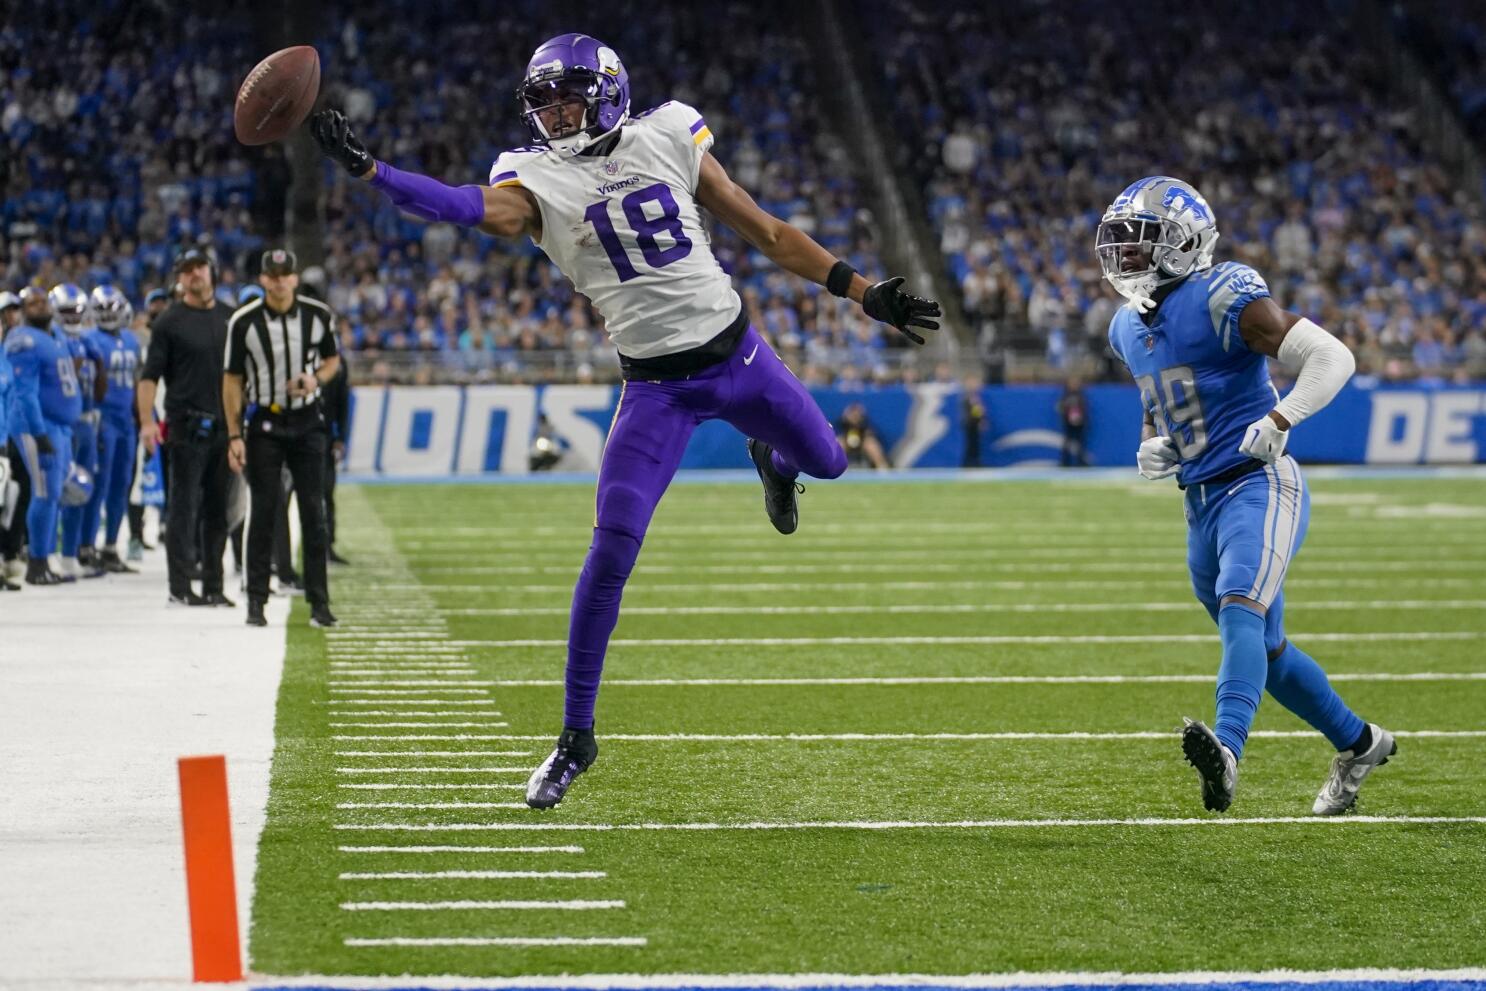 Vikings race to 10 wins while getting outscored overall